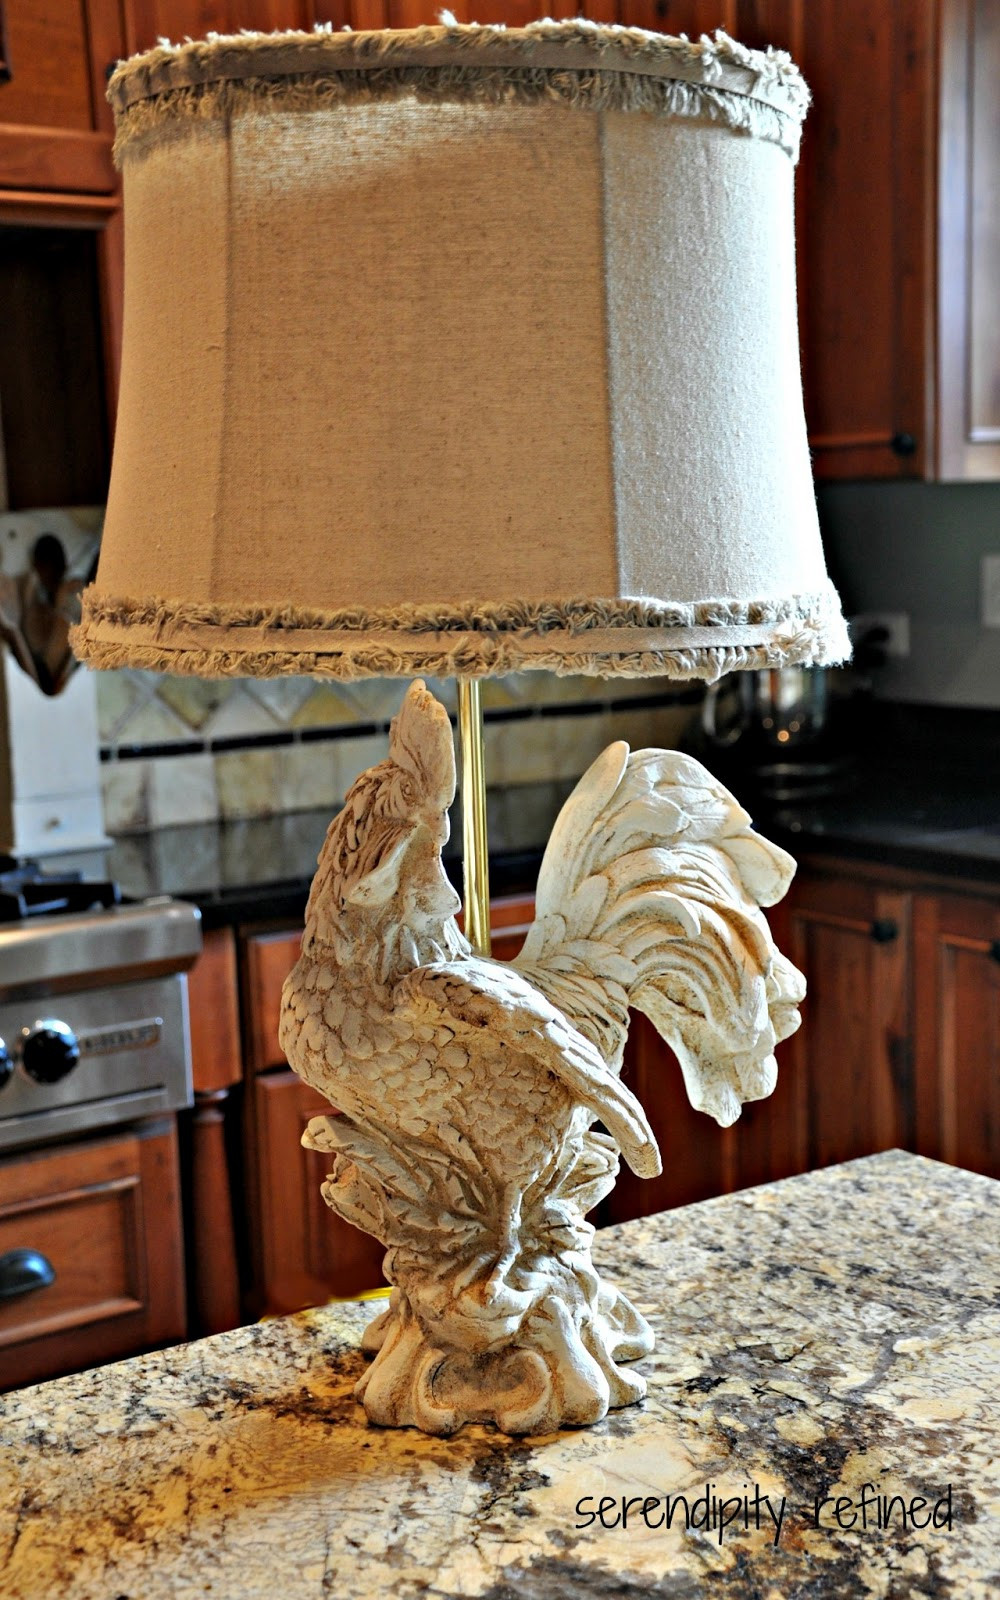 Lamps For Kitchen Counters Fresh Kitchen Table Lamps Rooster For Counter Accent Lamp Small Of Lamps For Kitchen Counters 